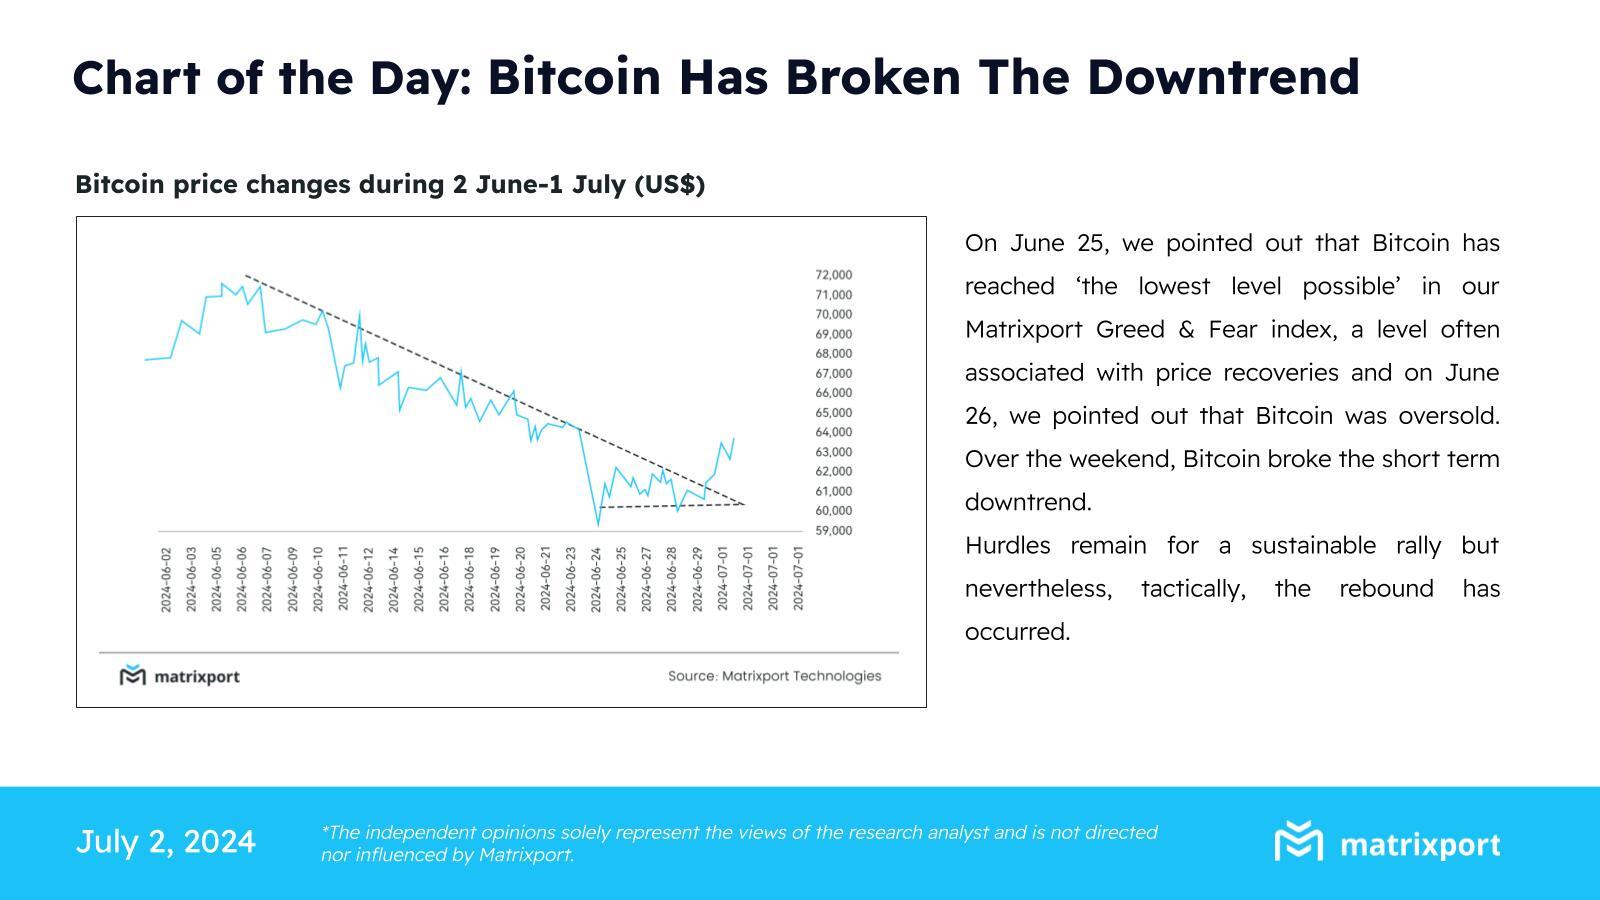 Bitcoin price breaks the downtrend